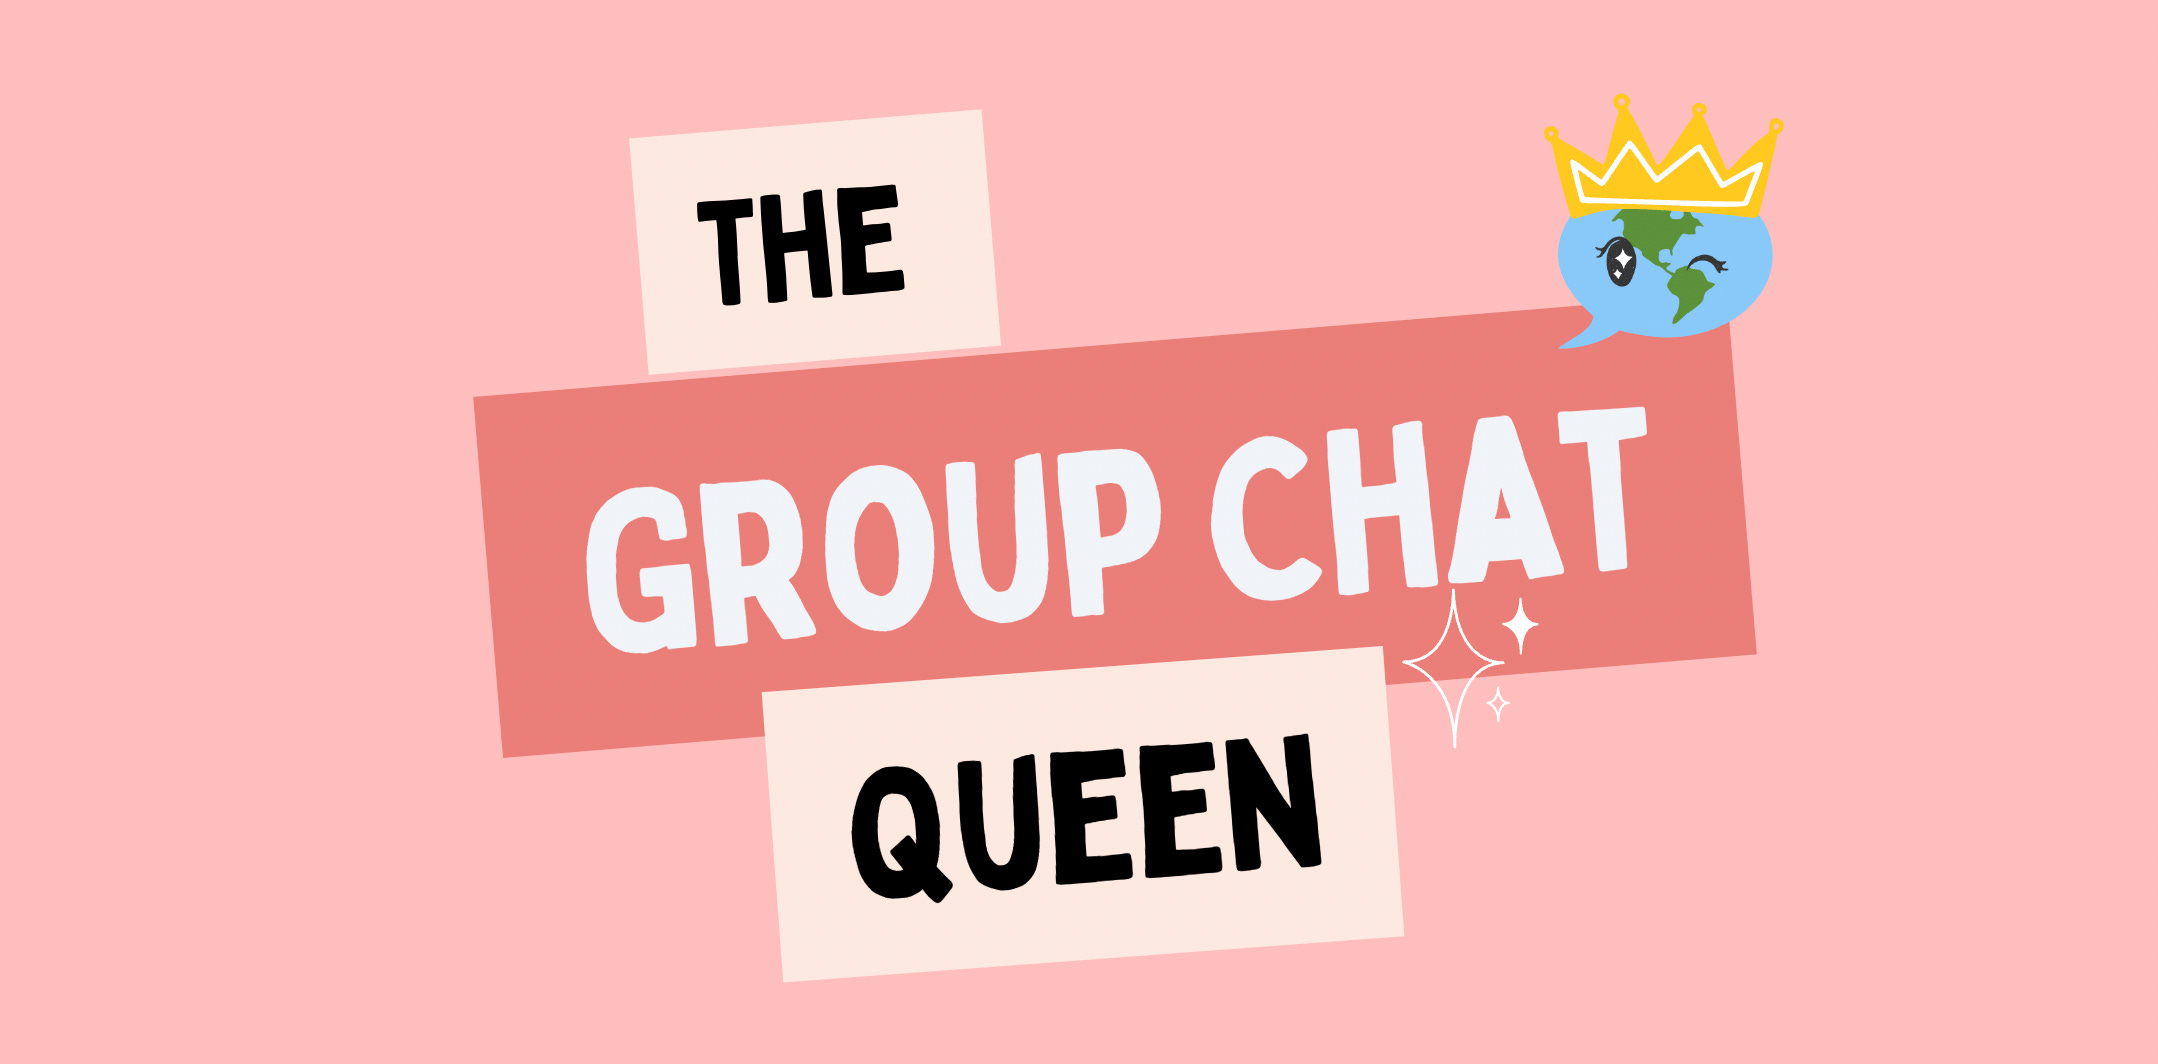 Artwork for The Group Chat Queen